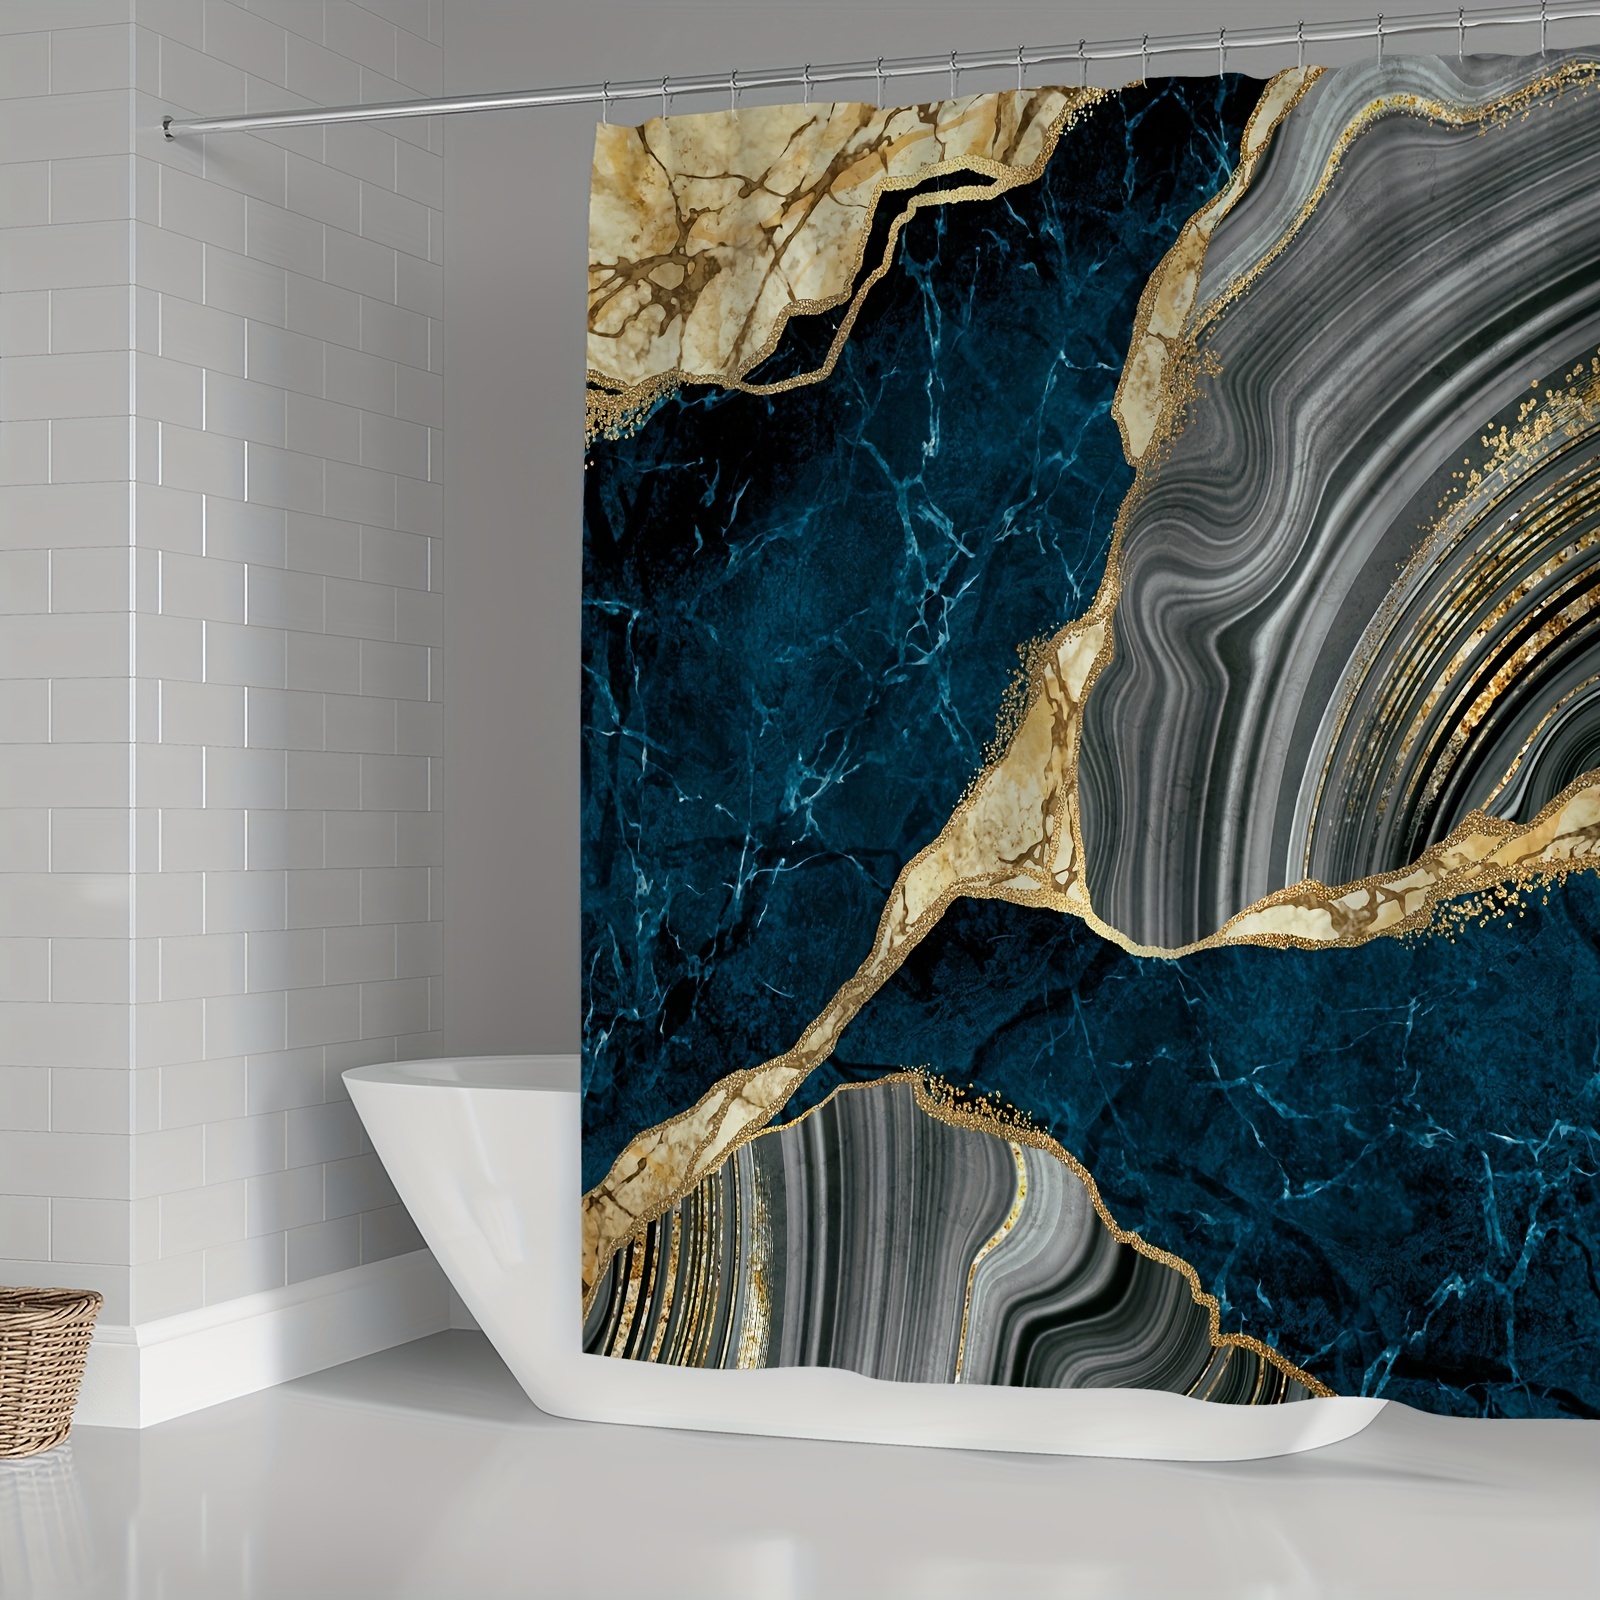 Abstract Marble Leaf Shower Curtain, Blue Gold Art Decor Style Bathtub  Showers Waterproof Polyester Design Decorative Bathroom with 12 Hooks  72*72 